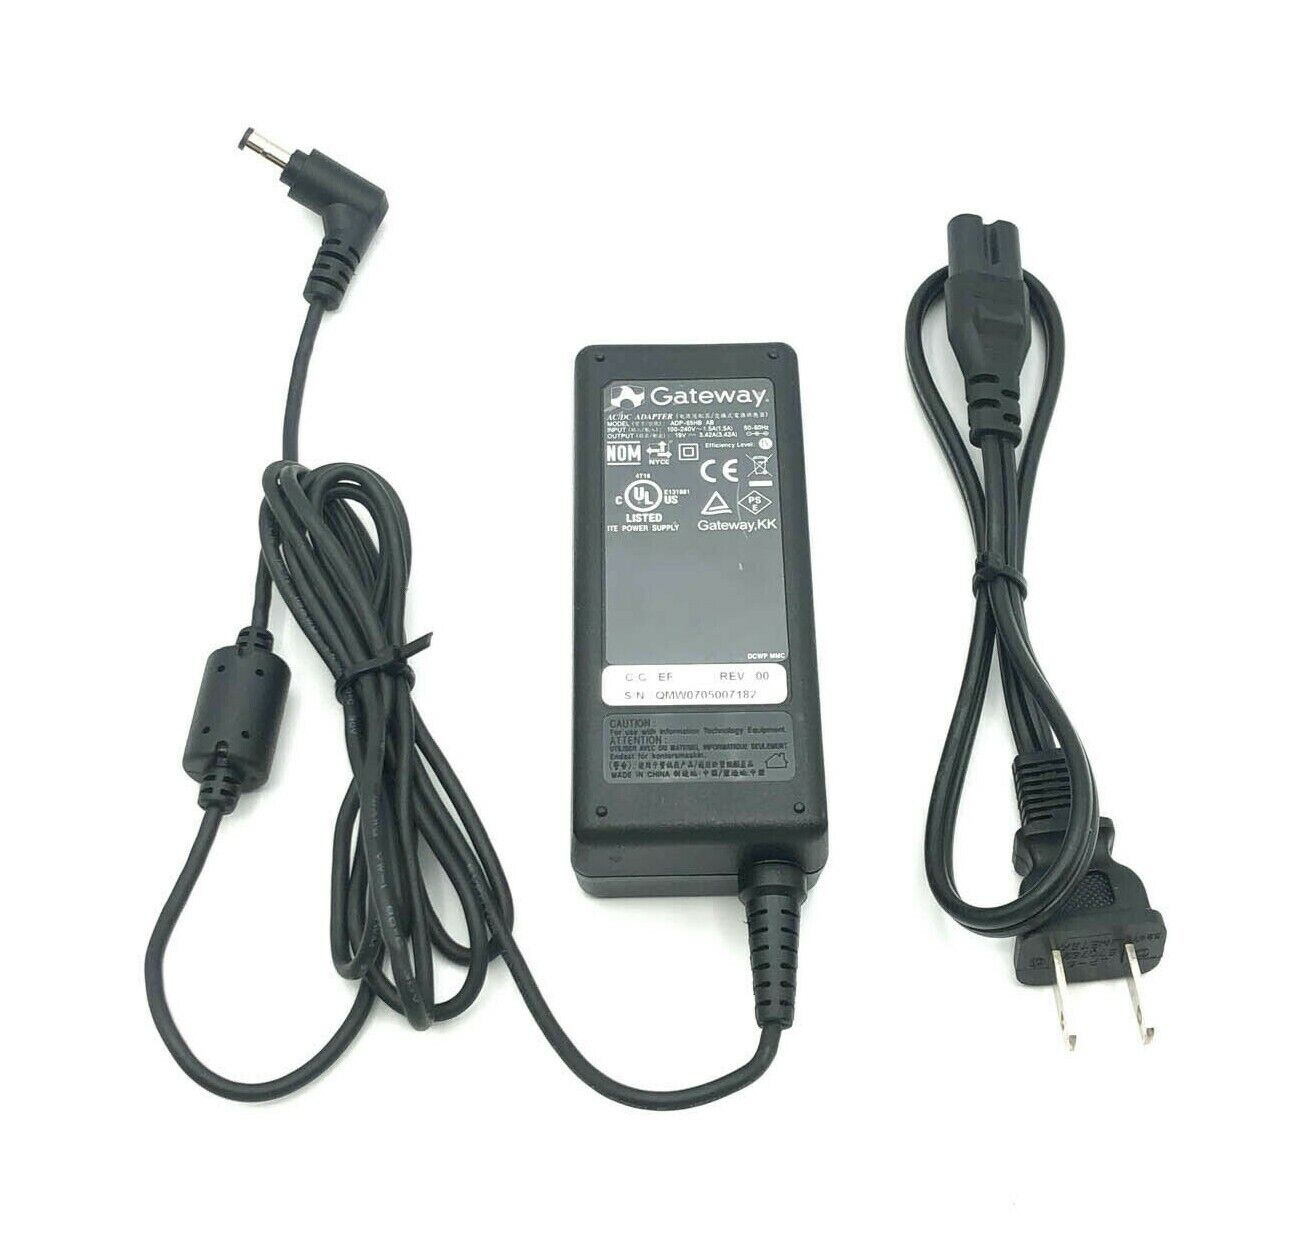 Genuine Gateway AC Charger Adapter for Gateway M - Series Laptop w/Power Cord